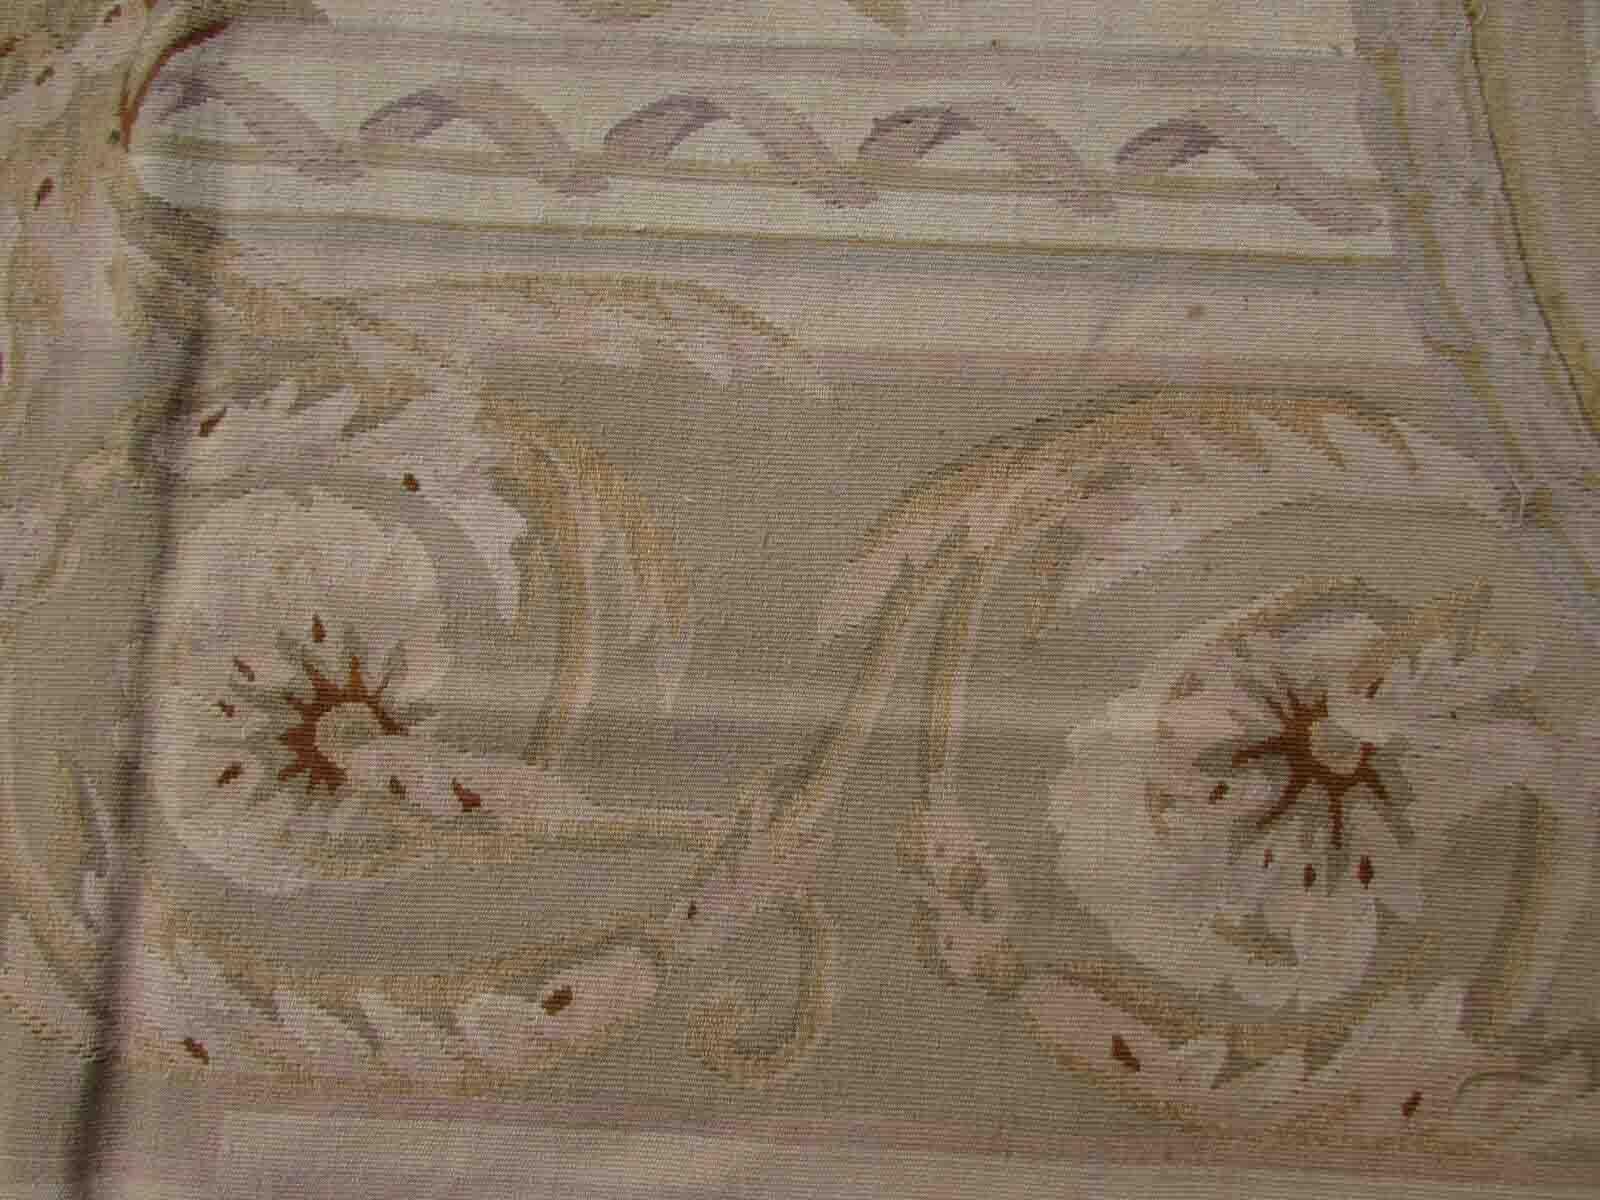 Handmade vintage French Aubusson rug in traditional design and pastel shades. The rug is from the end of 20th century in original good condition.

-condition: original good, 

-circa: 1970s,

-size: 9' x 12.2' (276cm x 373cm),

-material: